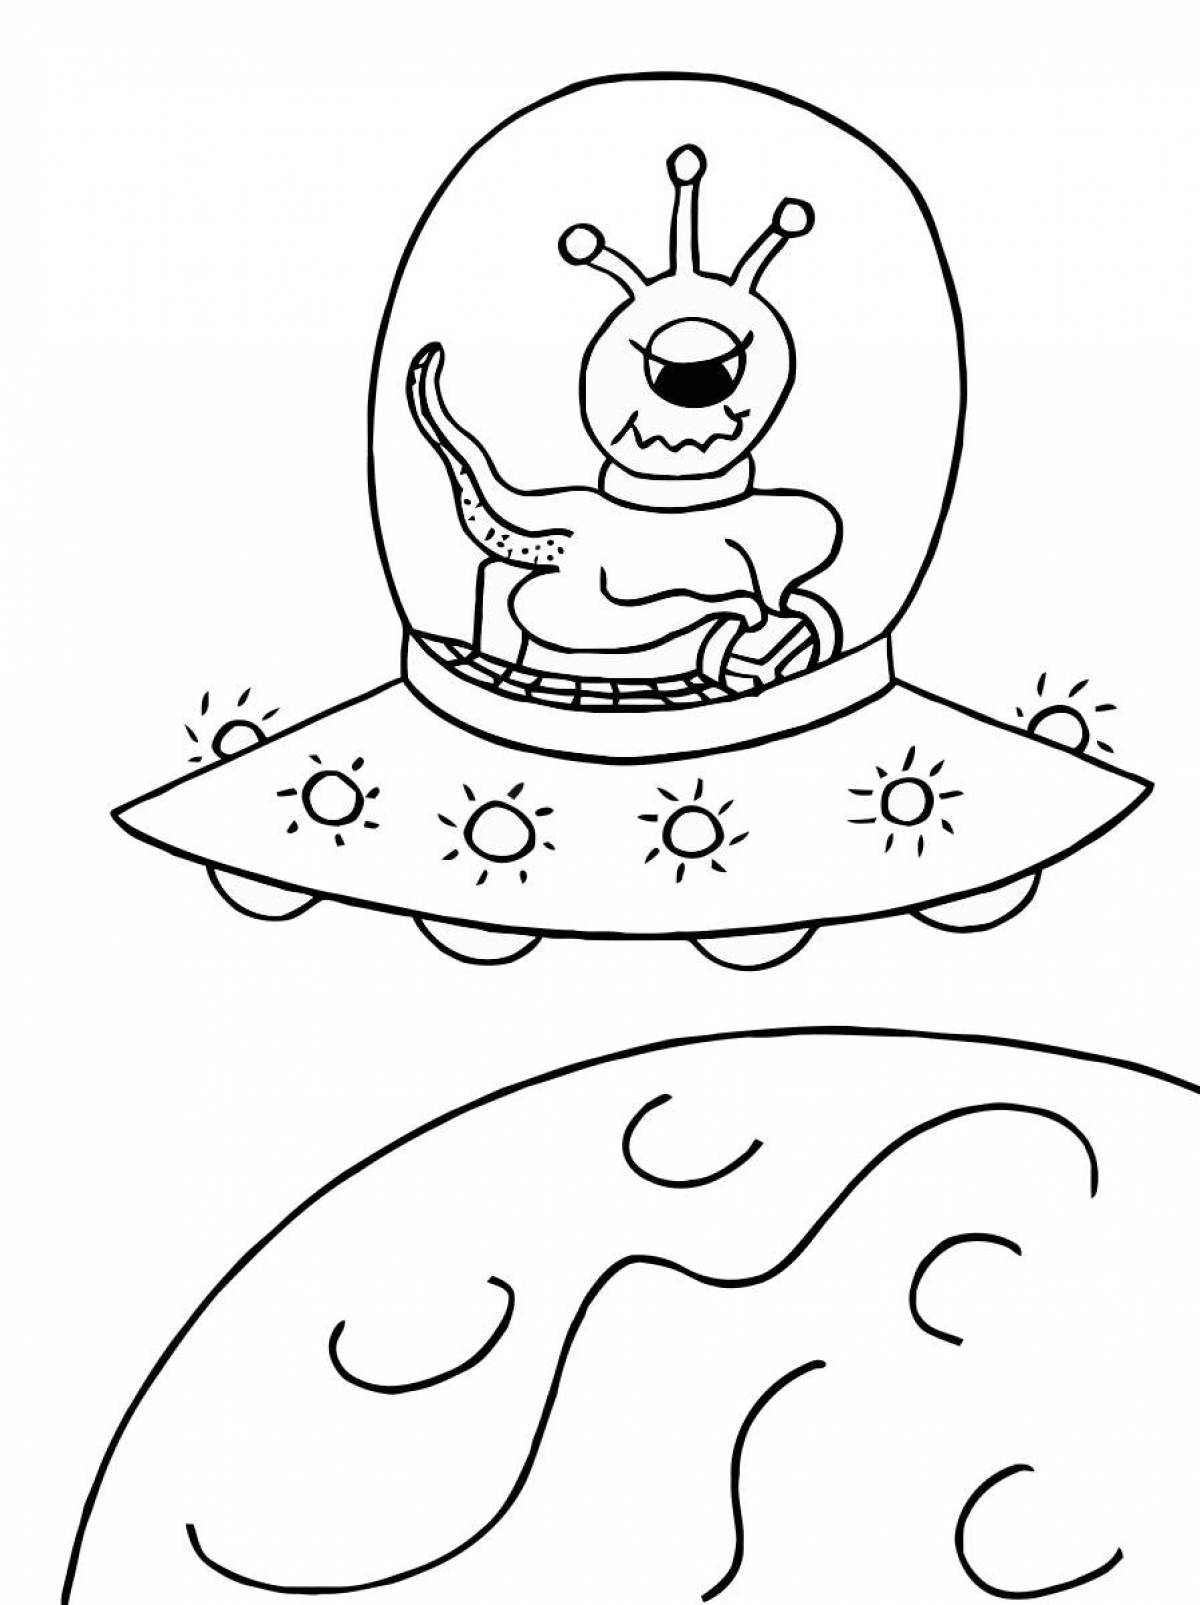 Aliens coloring page